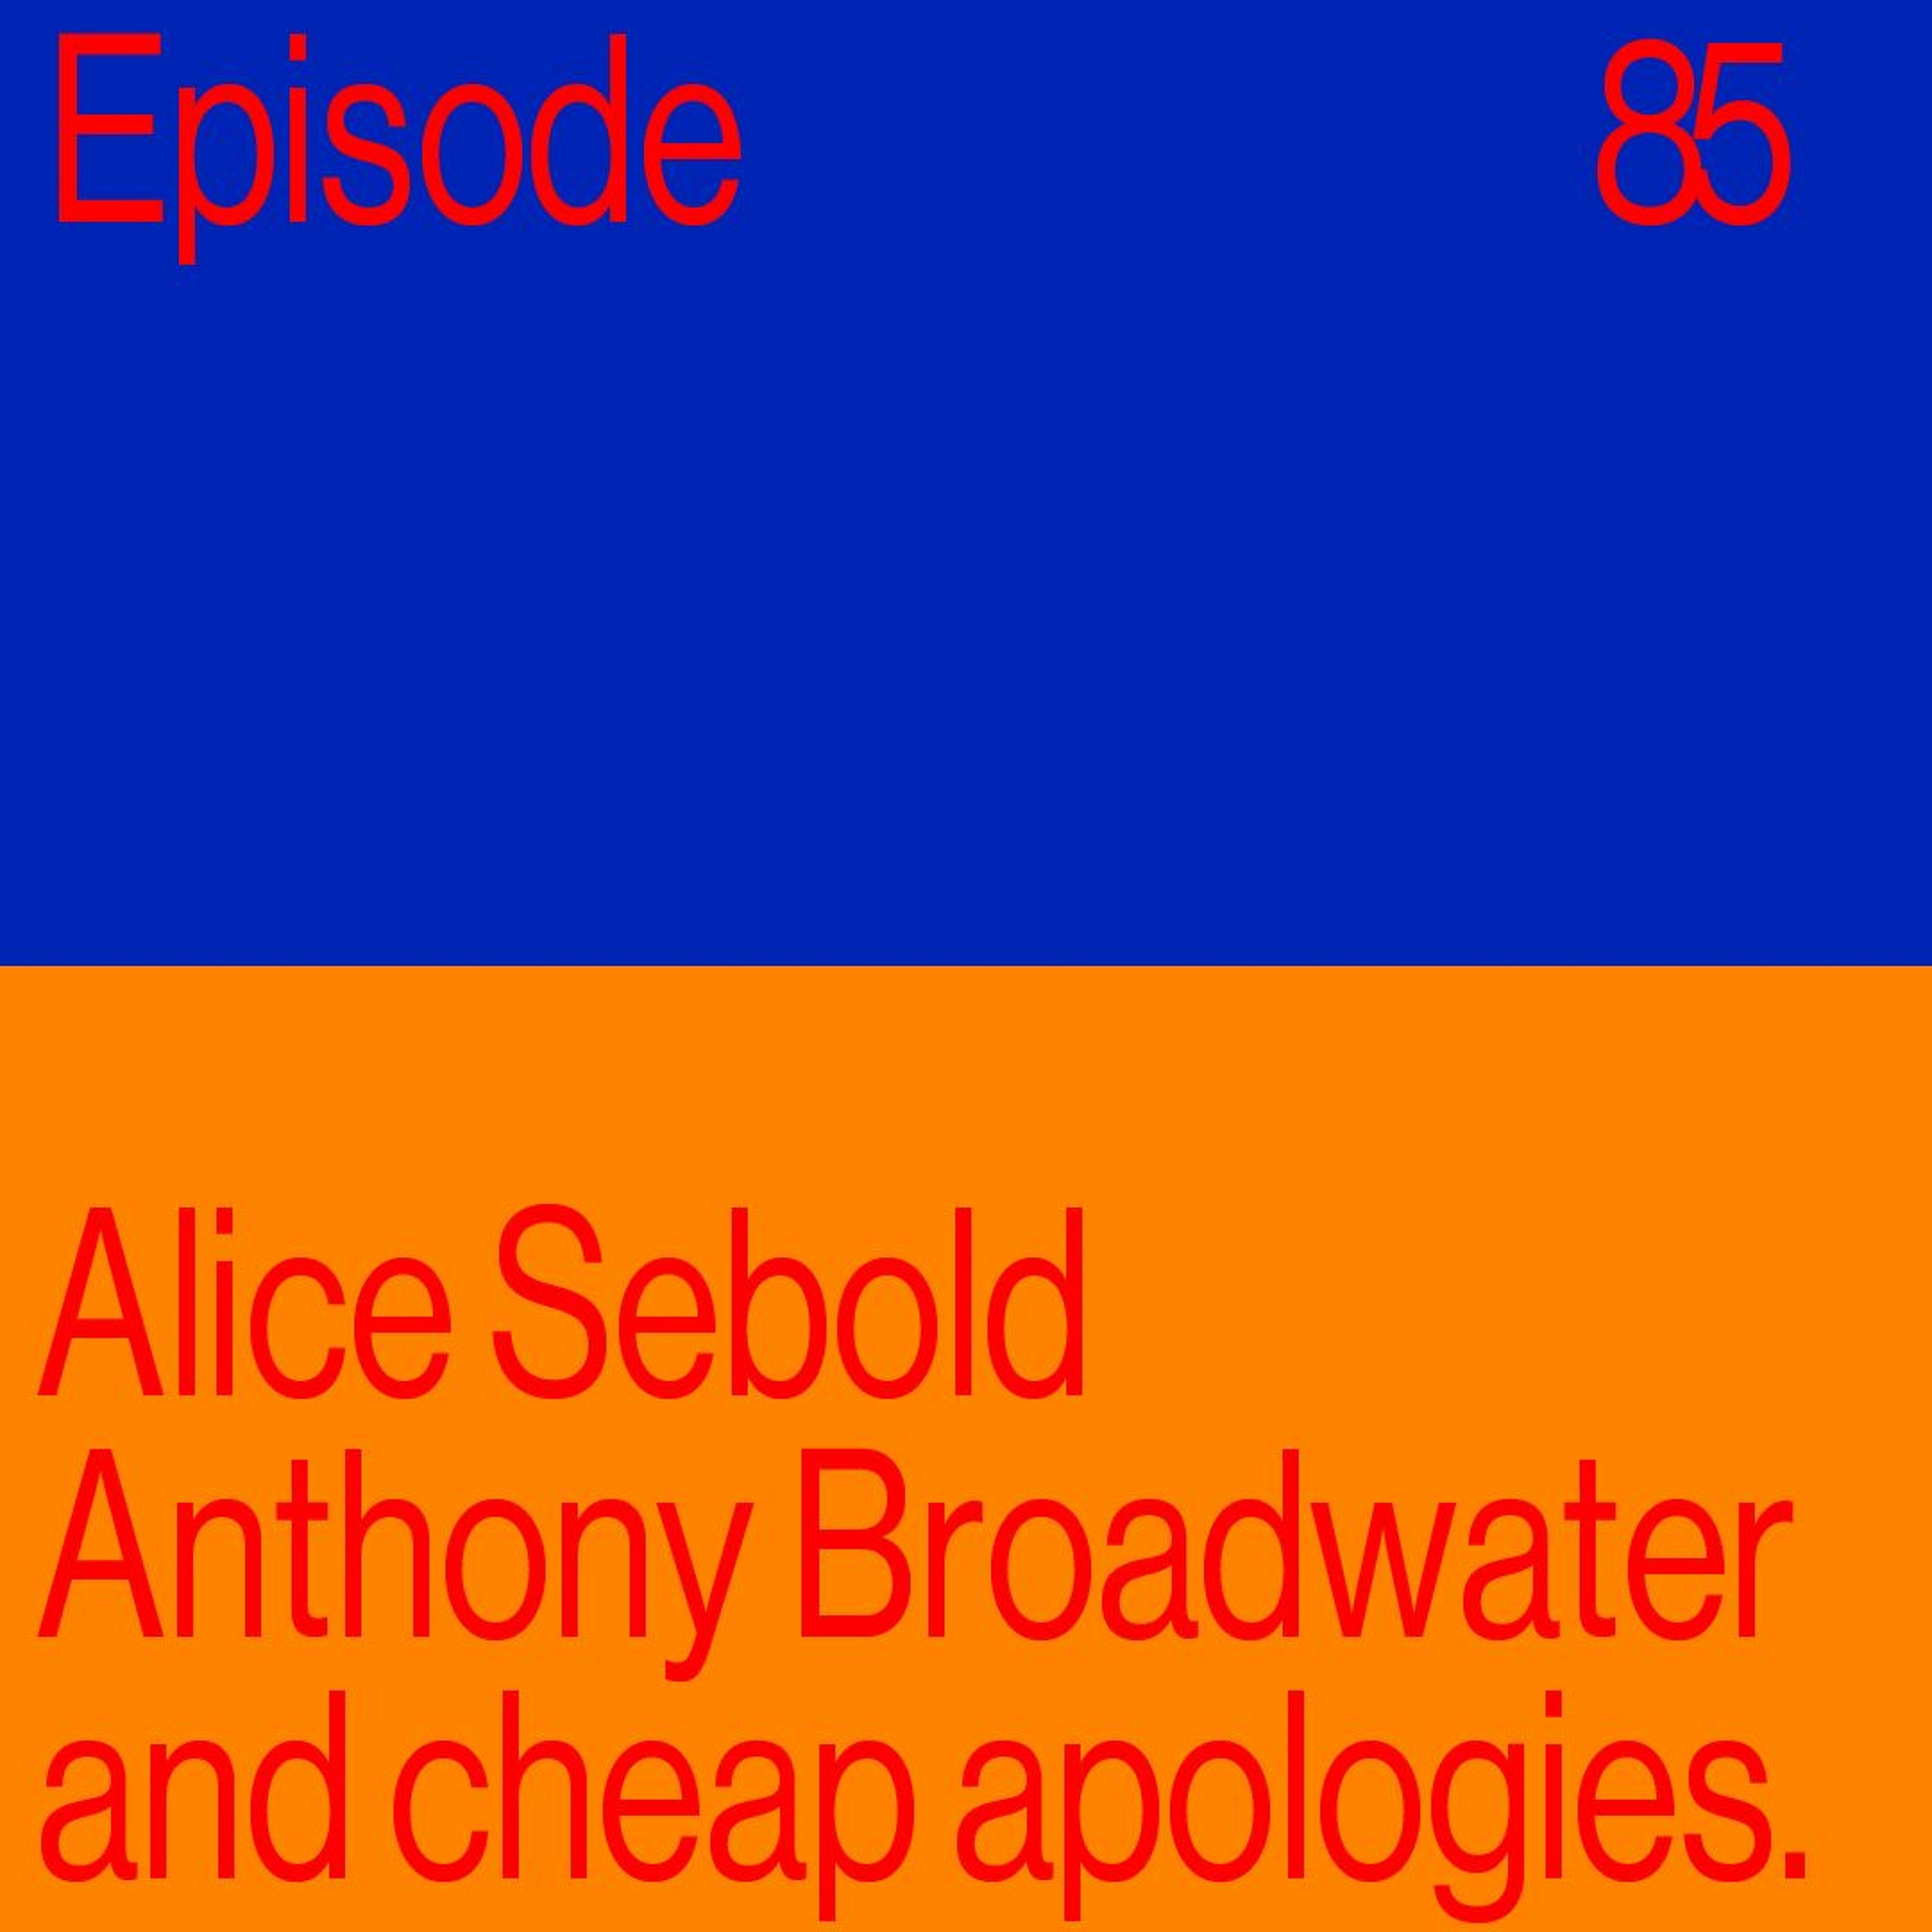 Episode 85: Alice Sebold, Anthony Broadwater, and Cheap Apologies